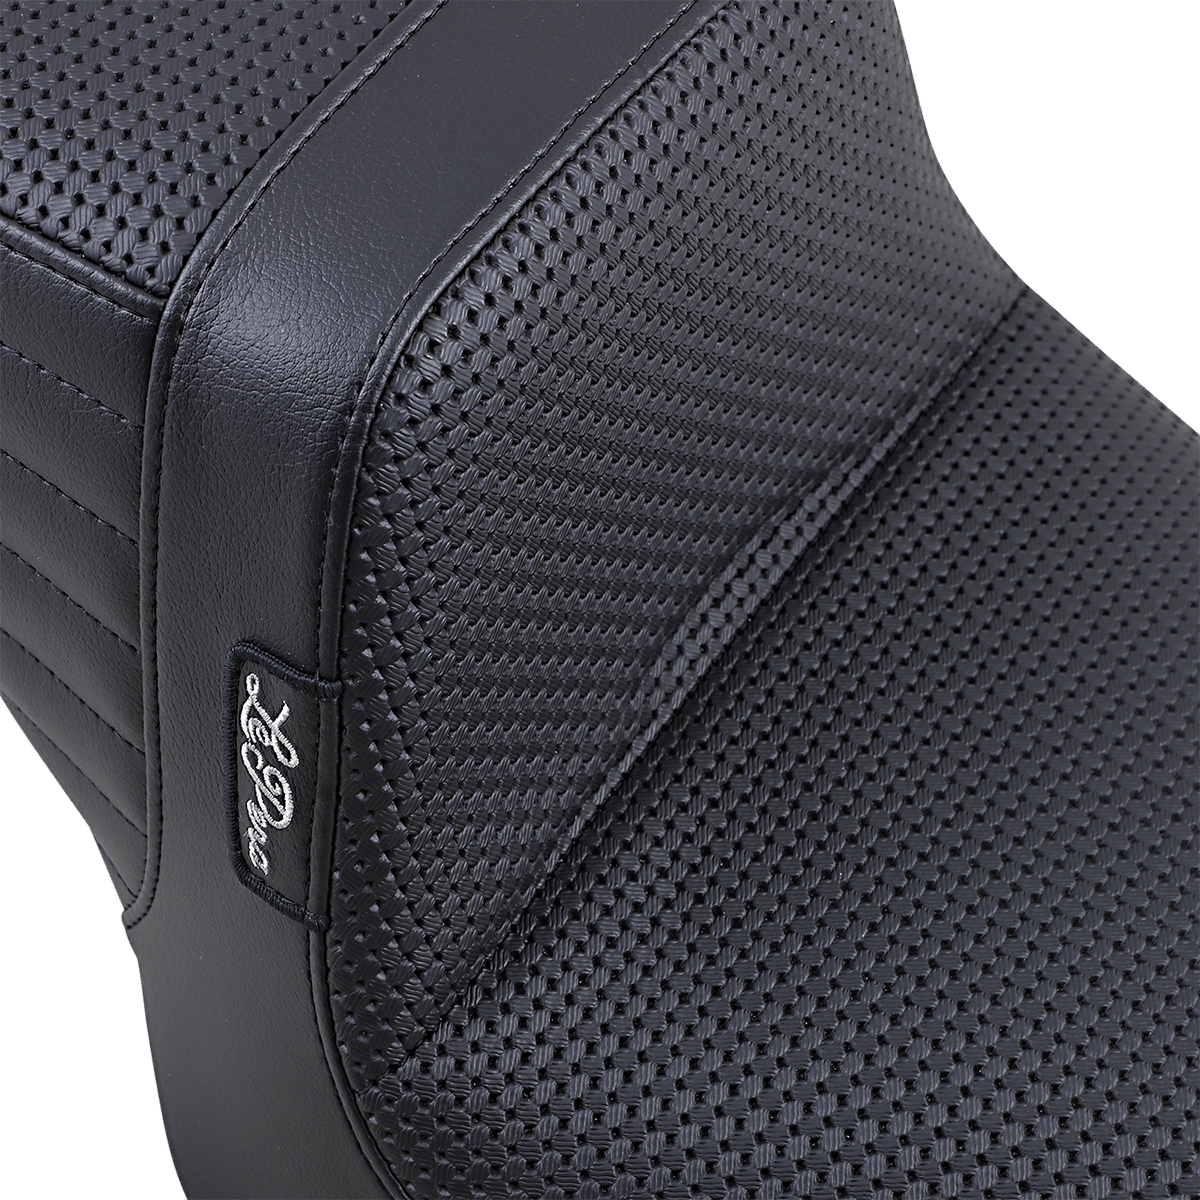 LE PERA-Tailwhip Seat / '10-'22 Sportster-Seats-MetalCore Harley Supply